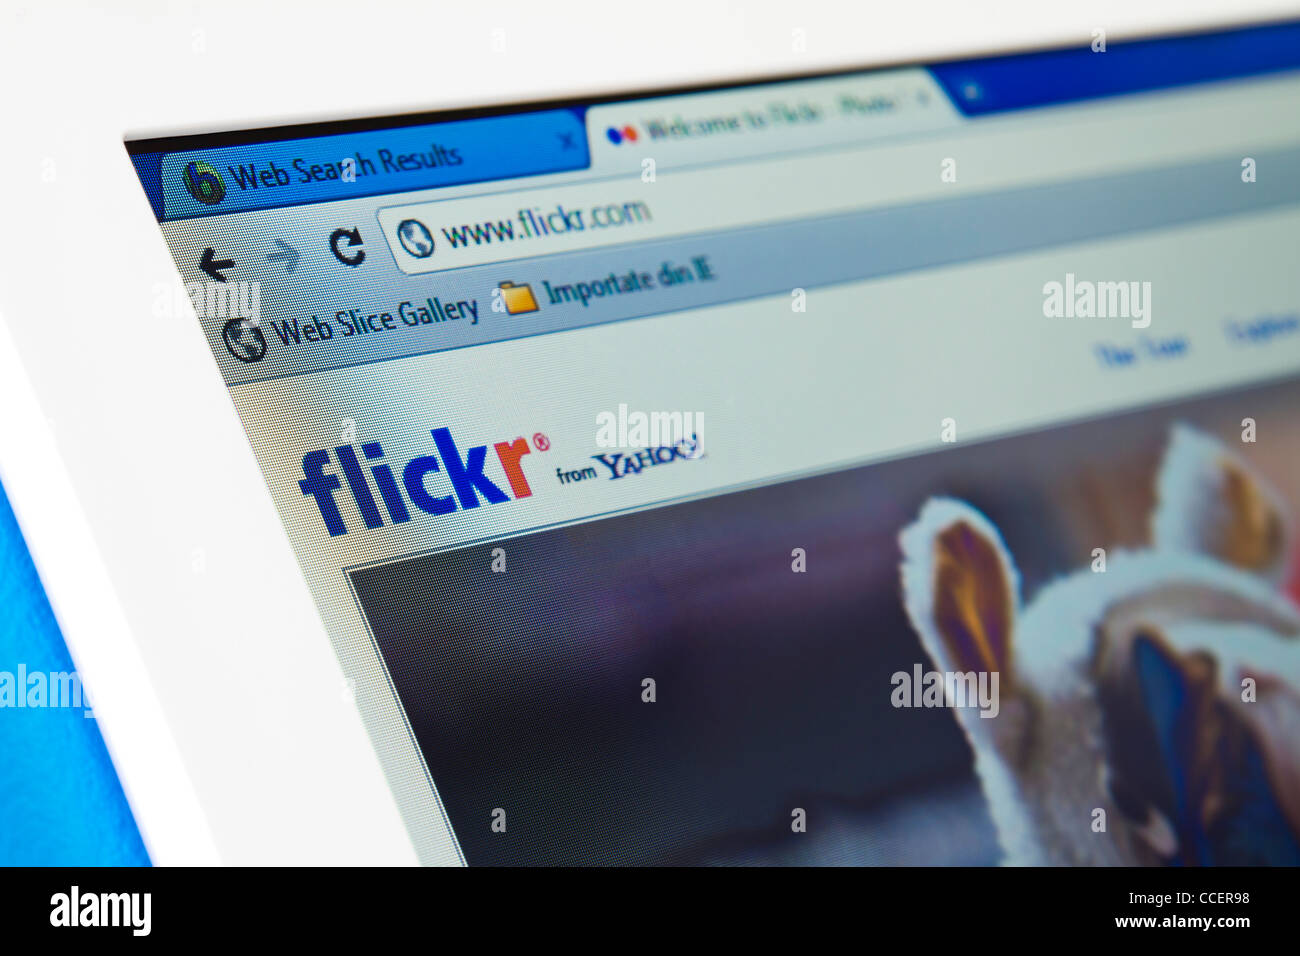 Flickr web page on the browser Stock Photo